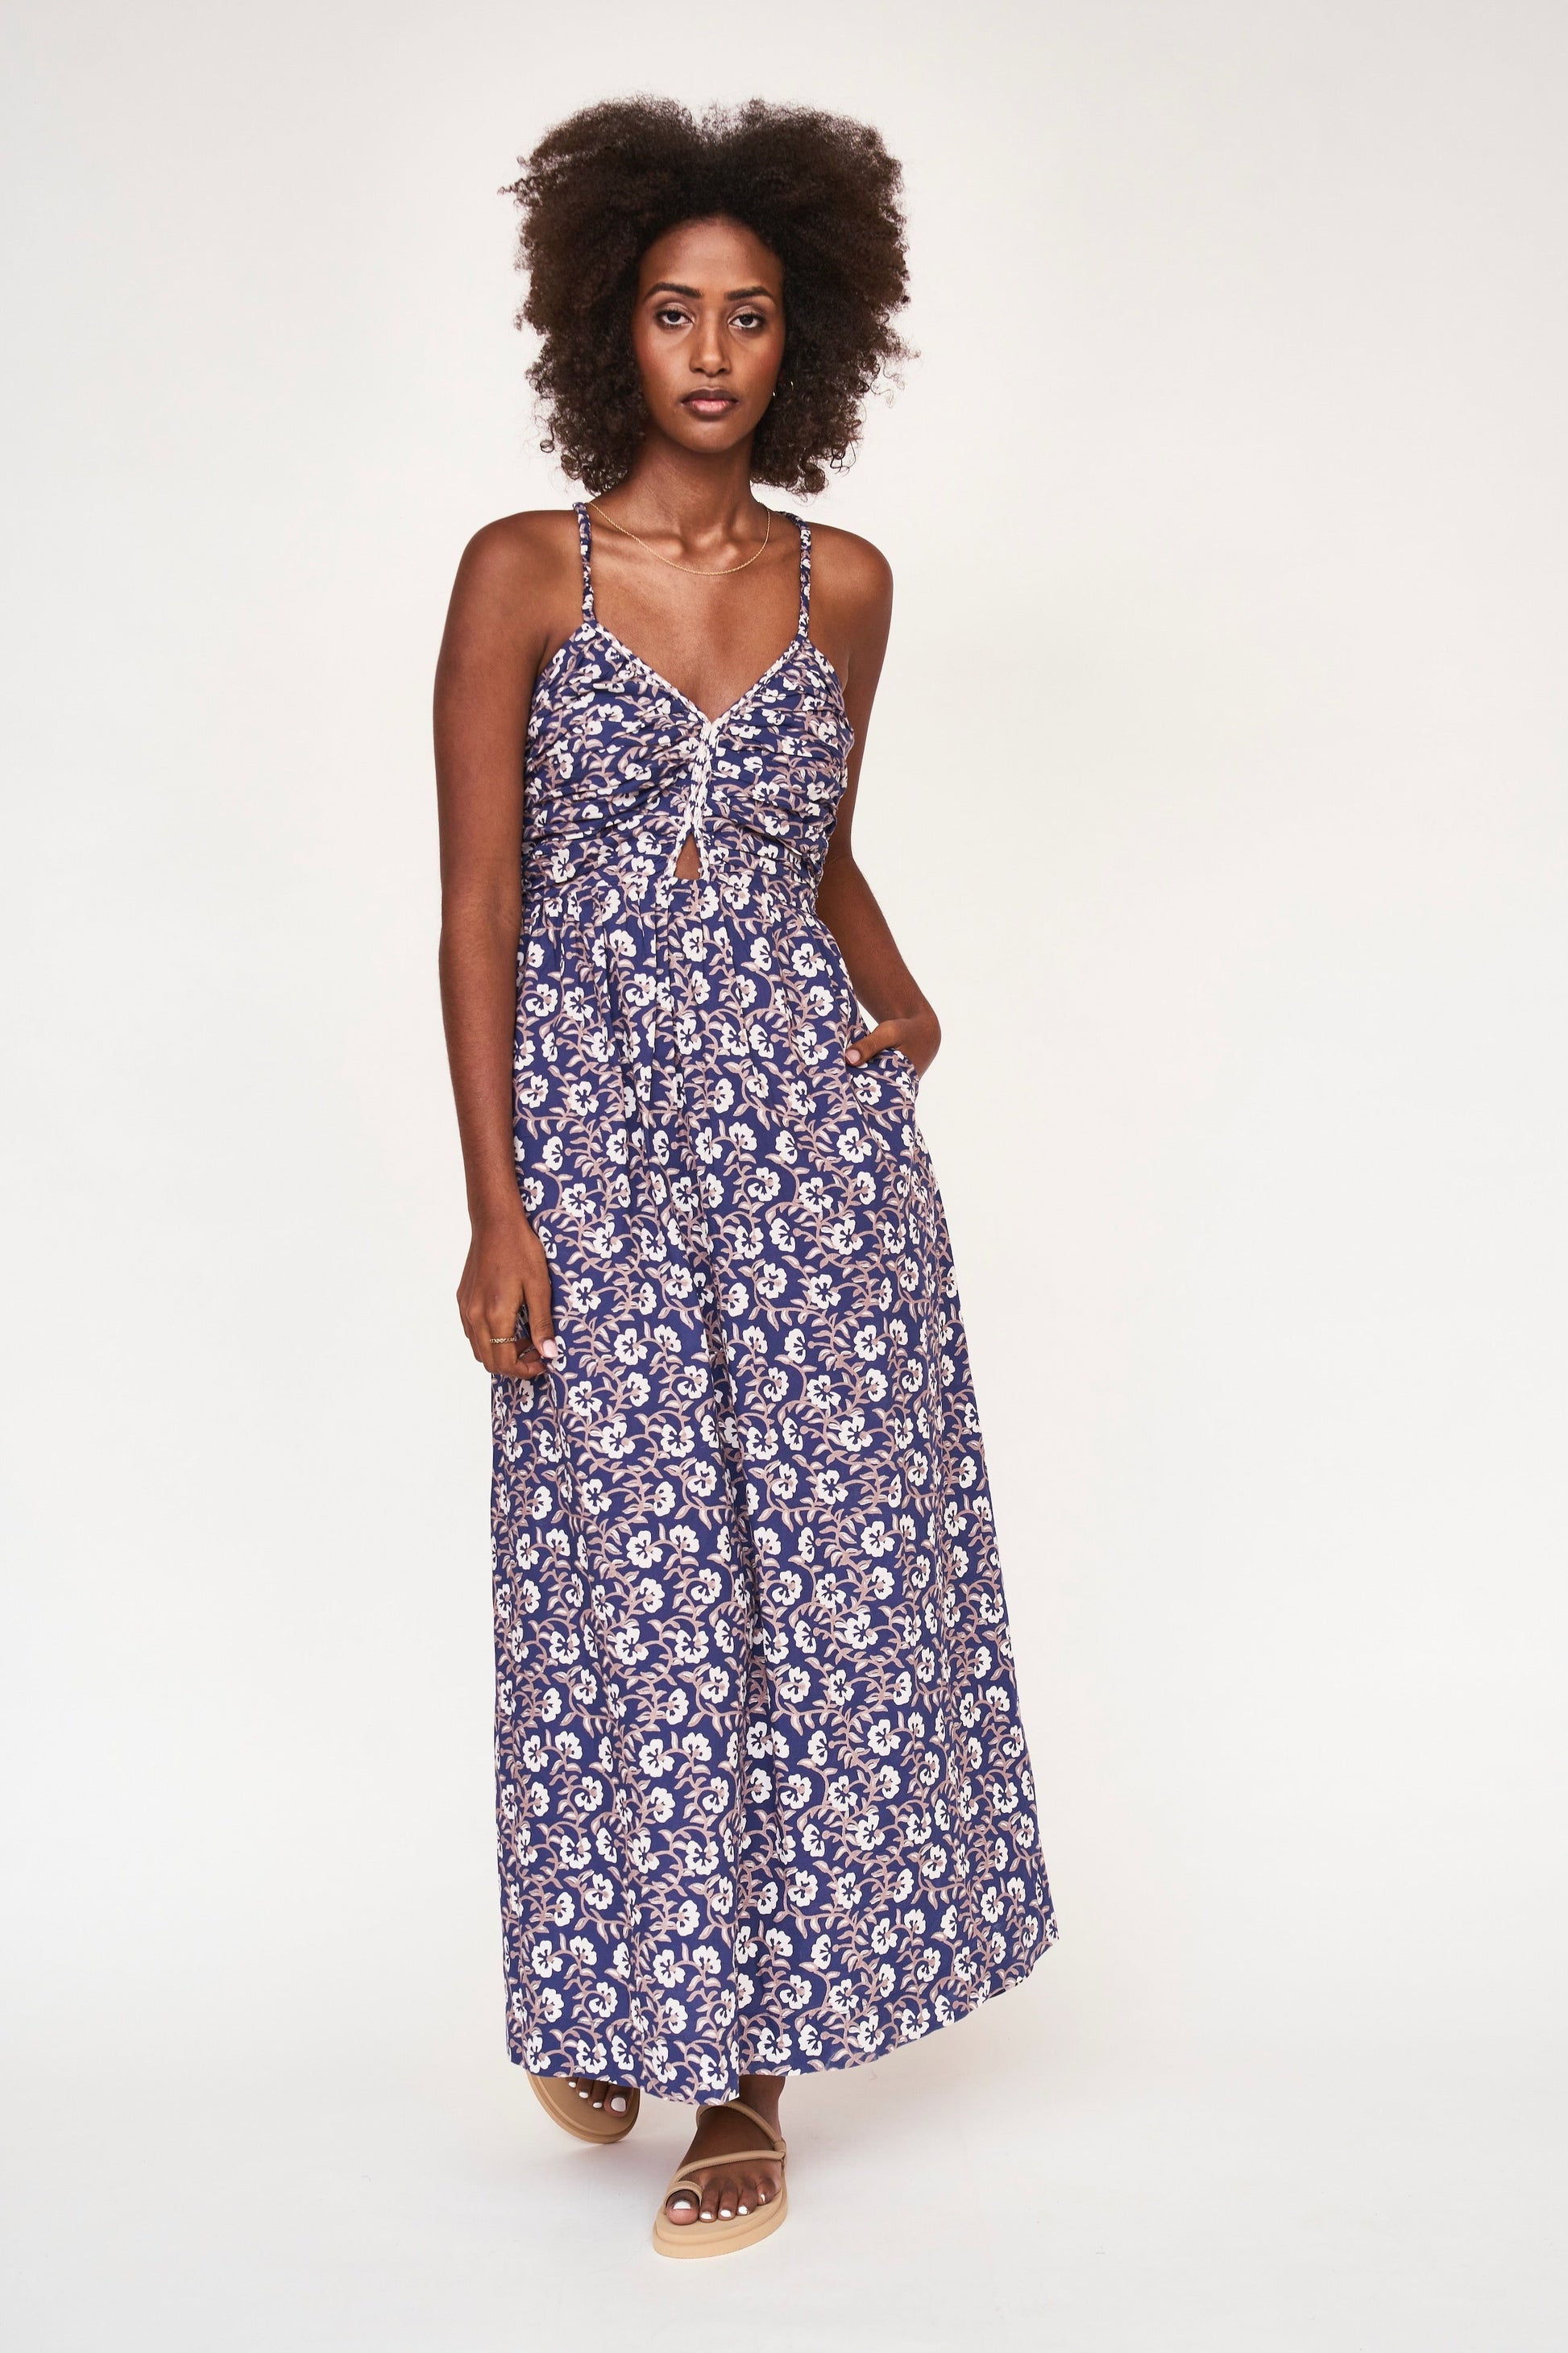 This effortless sundress transitions seamlessly from daytime to evening. Hand embroidered details along the front yoke make it extra special. Straps are elastic to ensure the perfect fit, as is the back bodice and waist. Ethically made with 100% cotton in India.